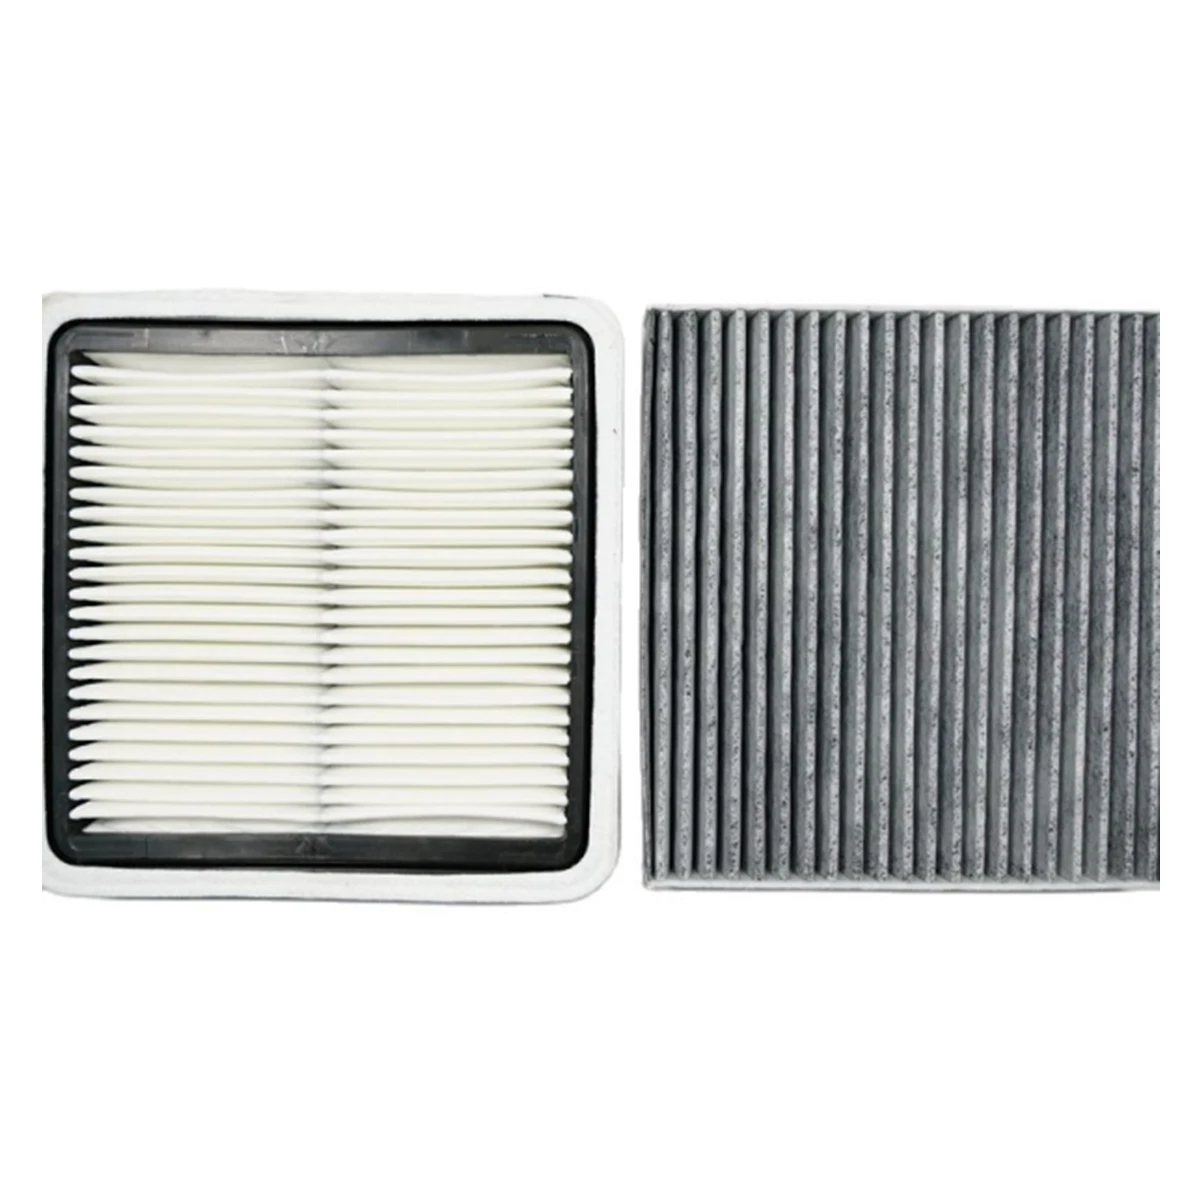 Set Filters For Subaru Legacy / Outback / Impreza air filter + active carbon cabin Air filter